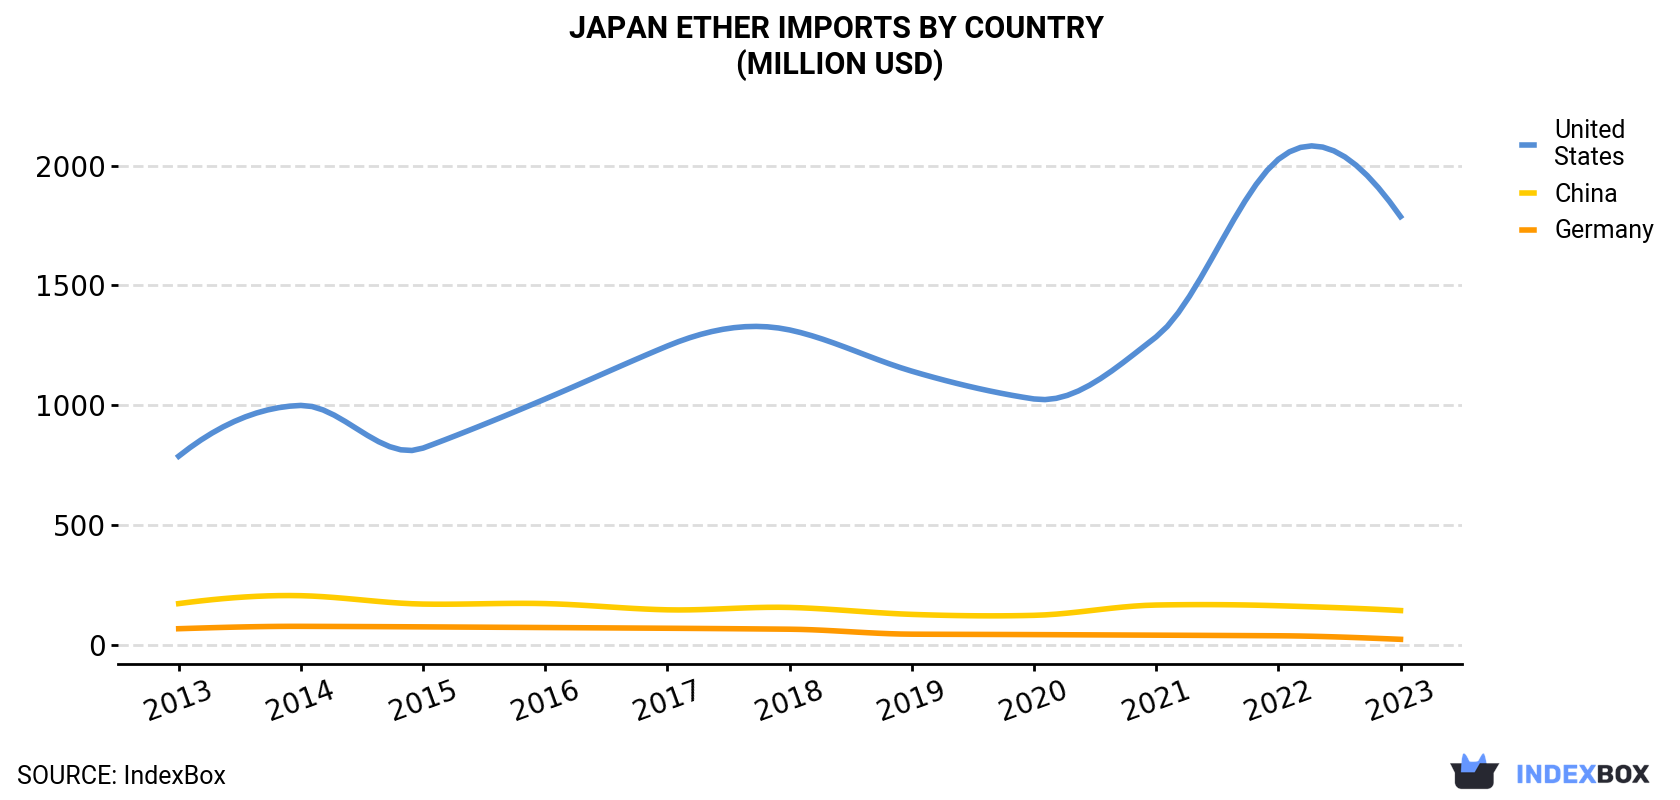 Japan Ether Imports By Country (Million USD)